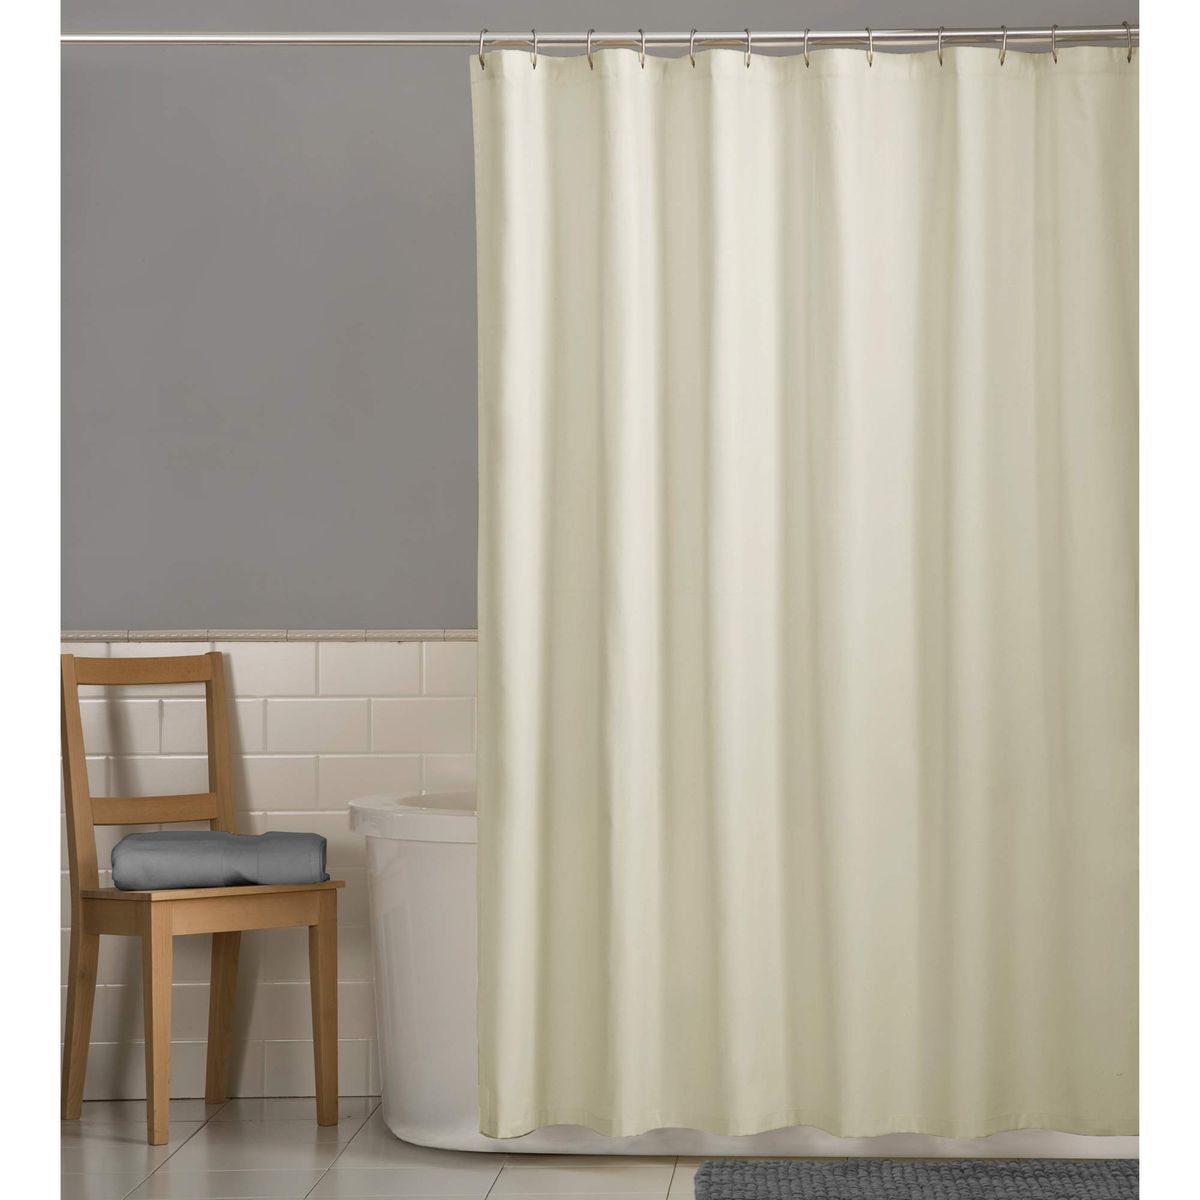 19 Best Shower Curtains 2021 The, Do Fabric Shower Curtains Need A Liner